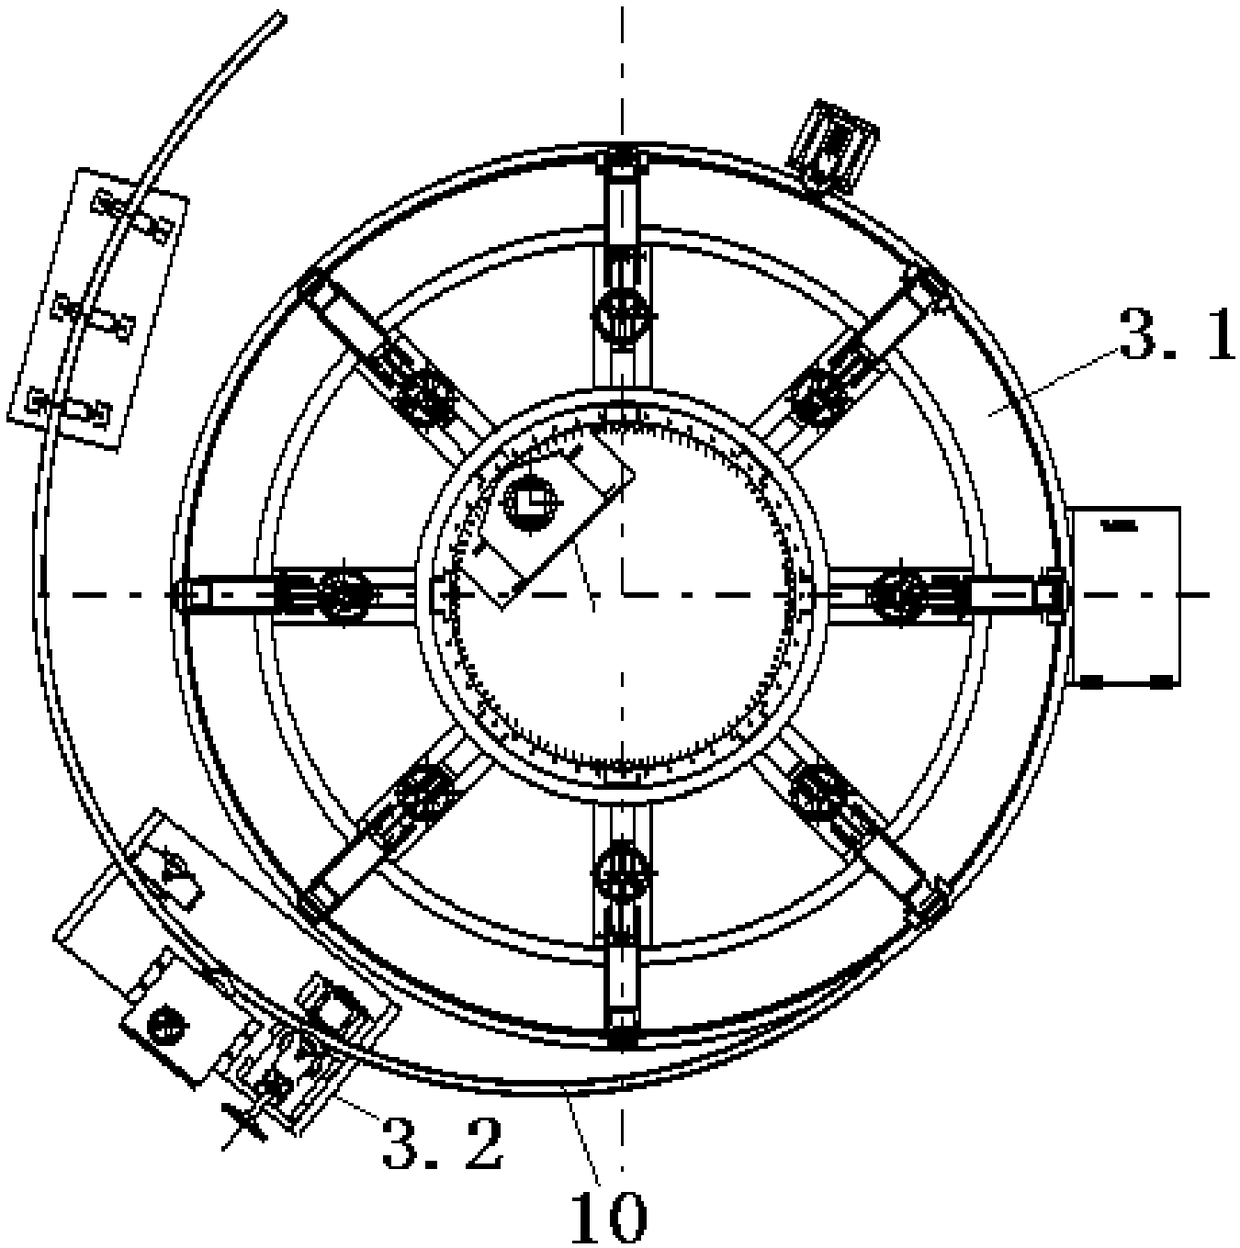 Bifilar winding system for manufacture of nuclear fusion polar field superconducting magnets